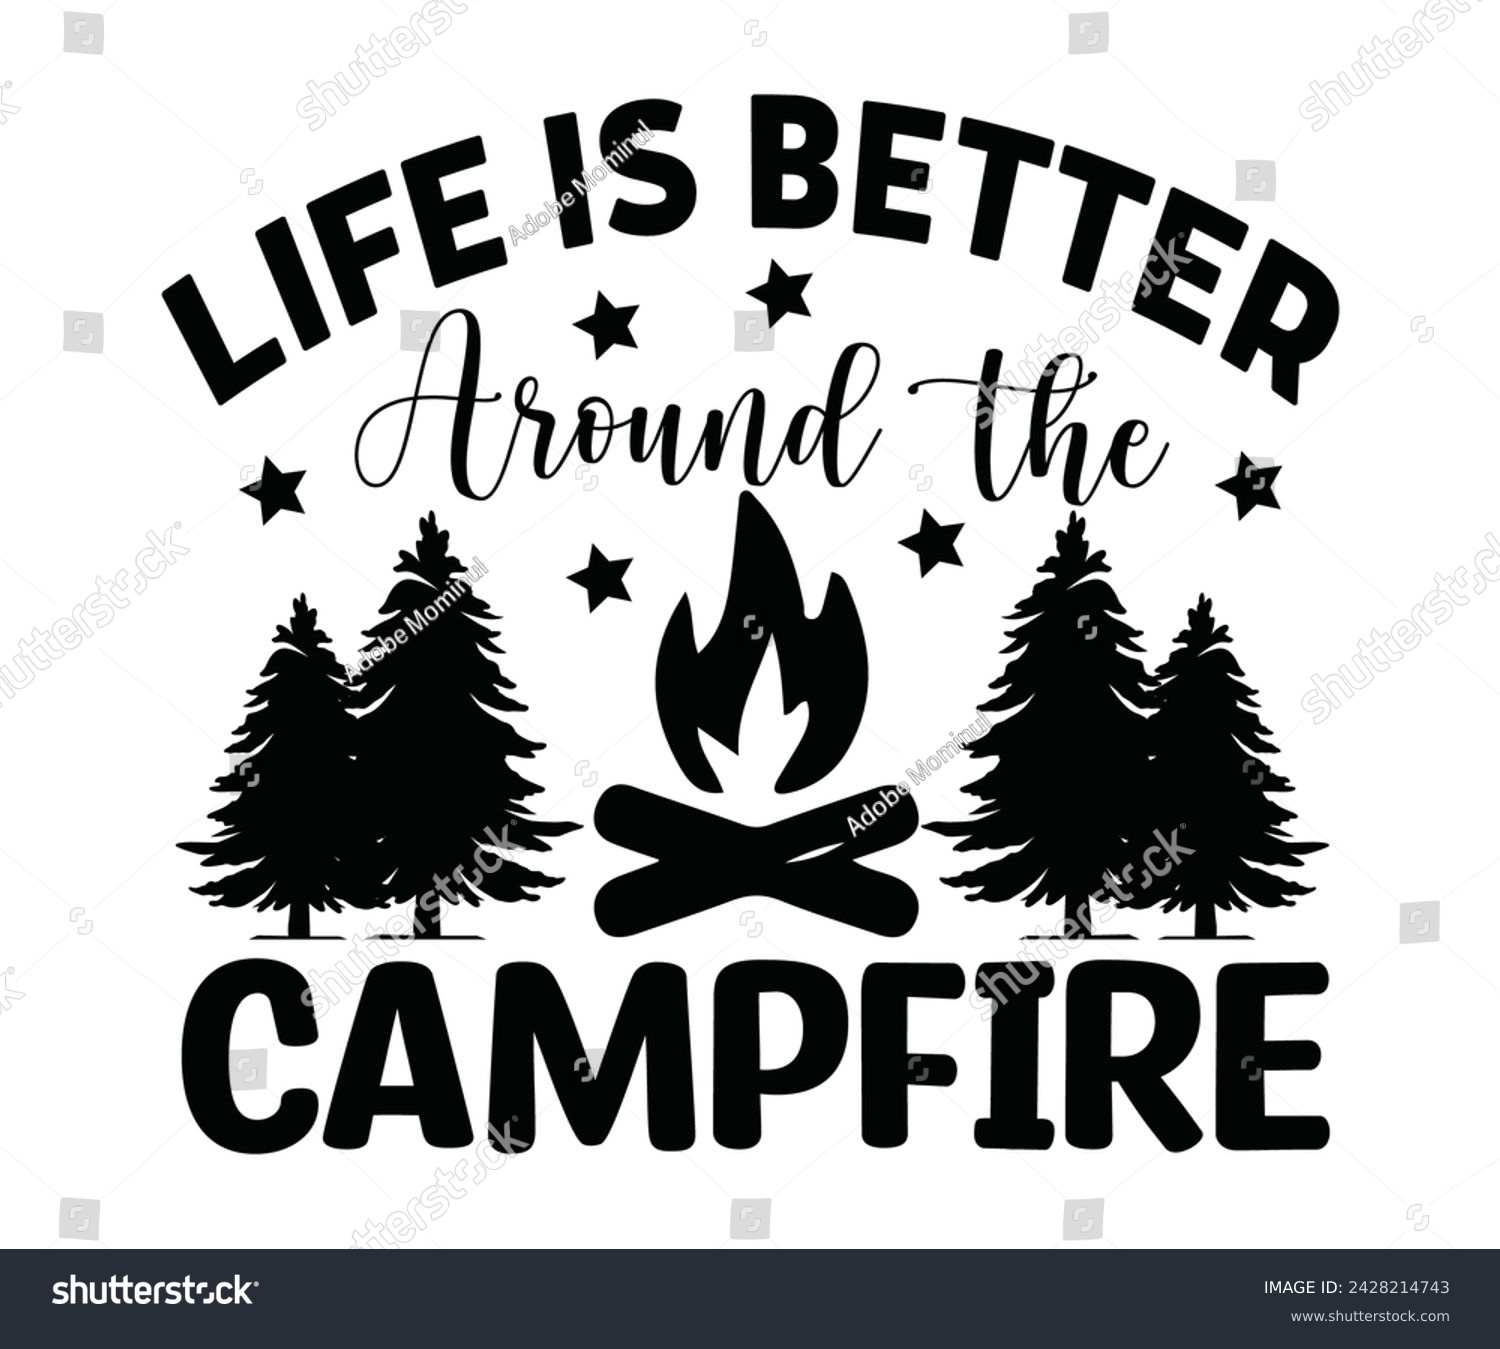 SVG of Life Is Better Around The Campfire Svg,Happy Camper Svg,Camping Svg,Adventure Svg,Hiking Svg,Camp Saying,Camp Life Svg,Svg Cut Files, Png,Mountain T-shirt,Instant Download svg